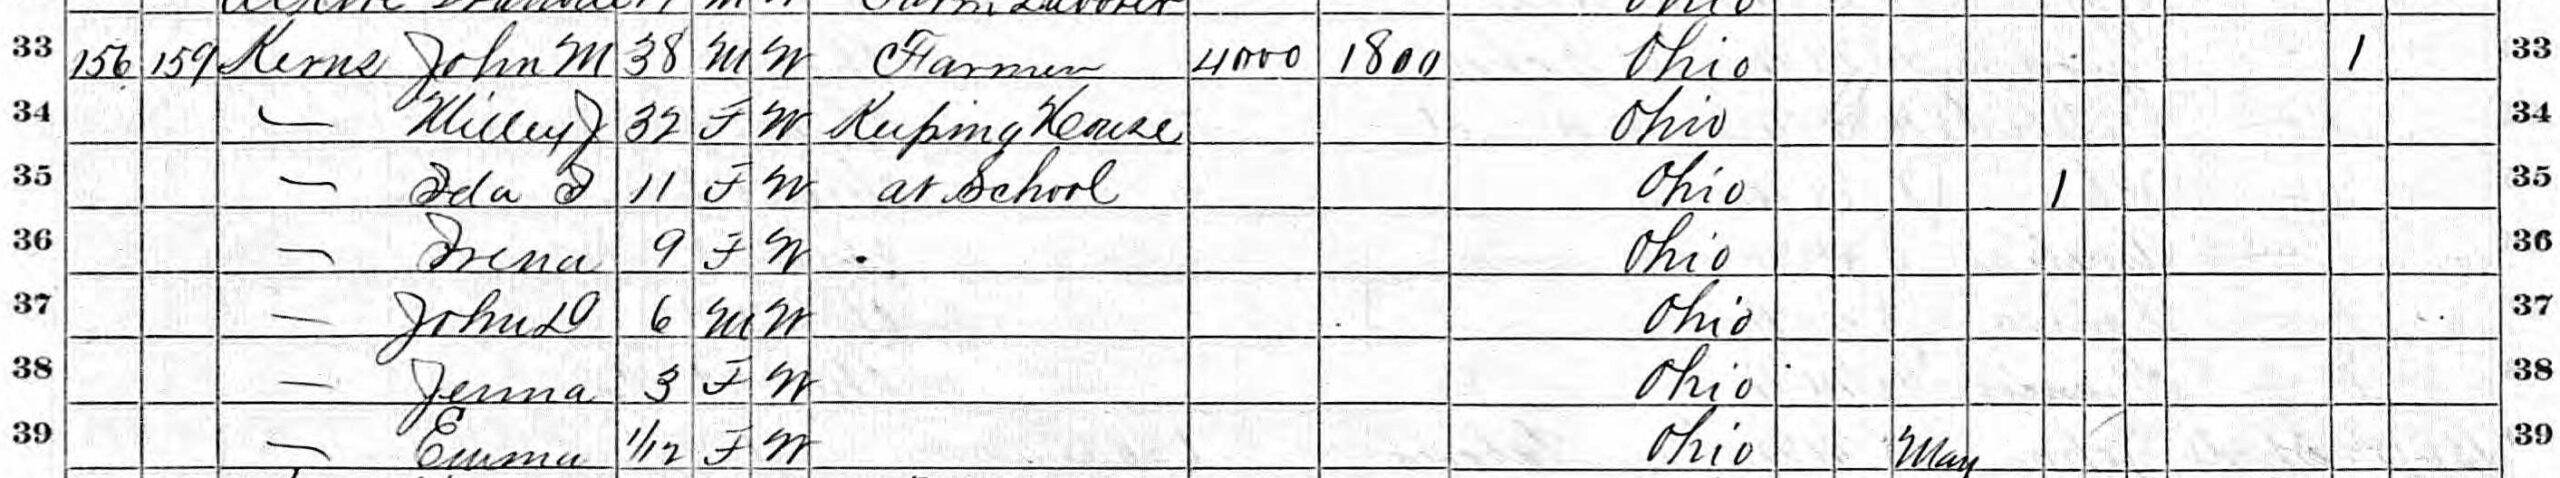 A portion of the 1870 census with the John and Millia Kearnes/Karns family